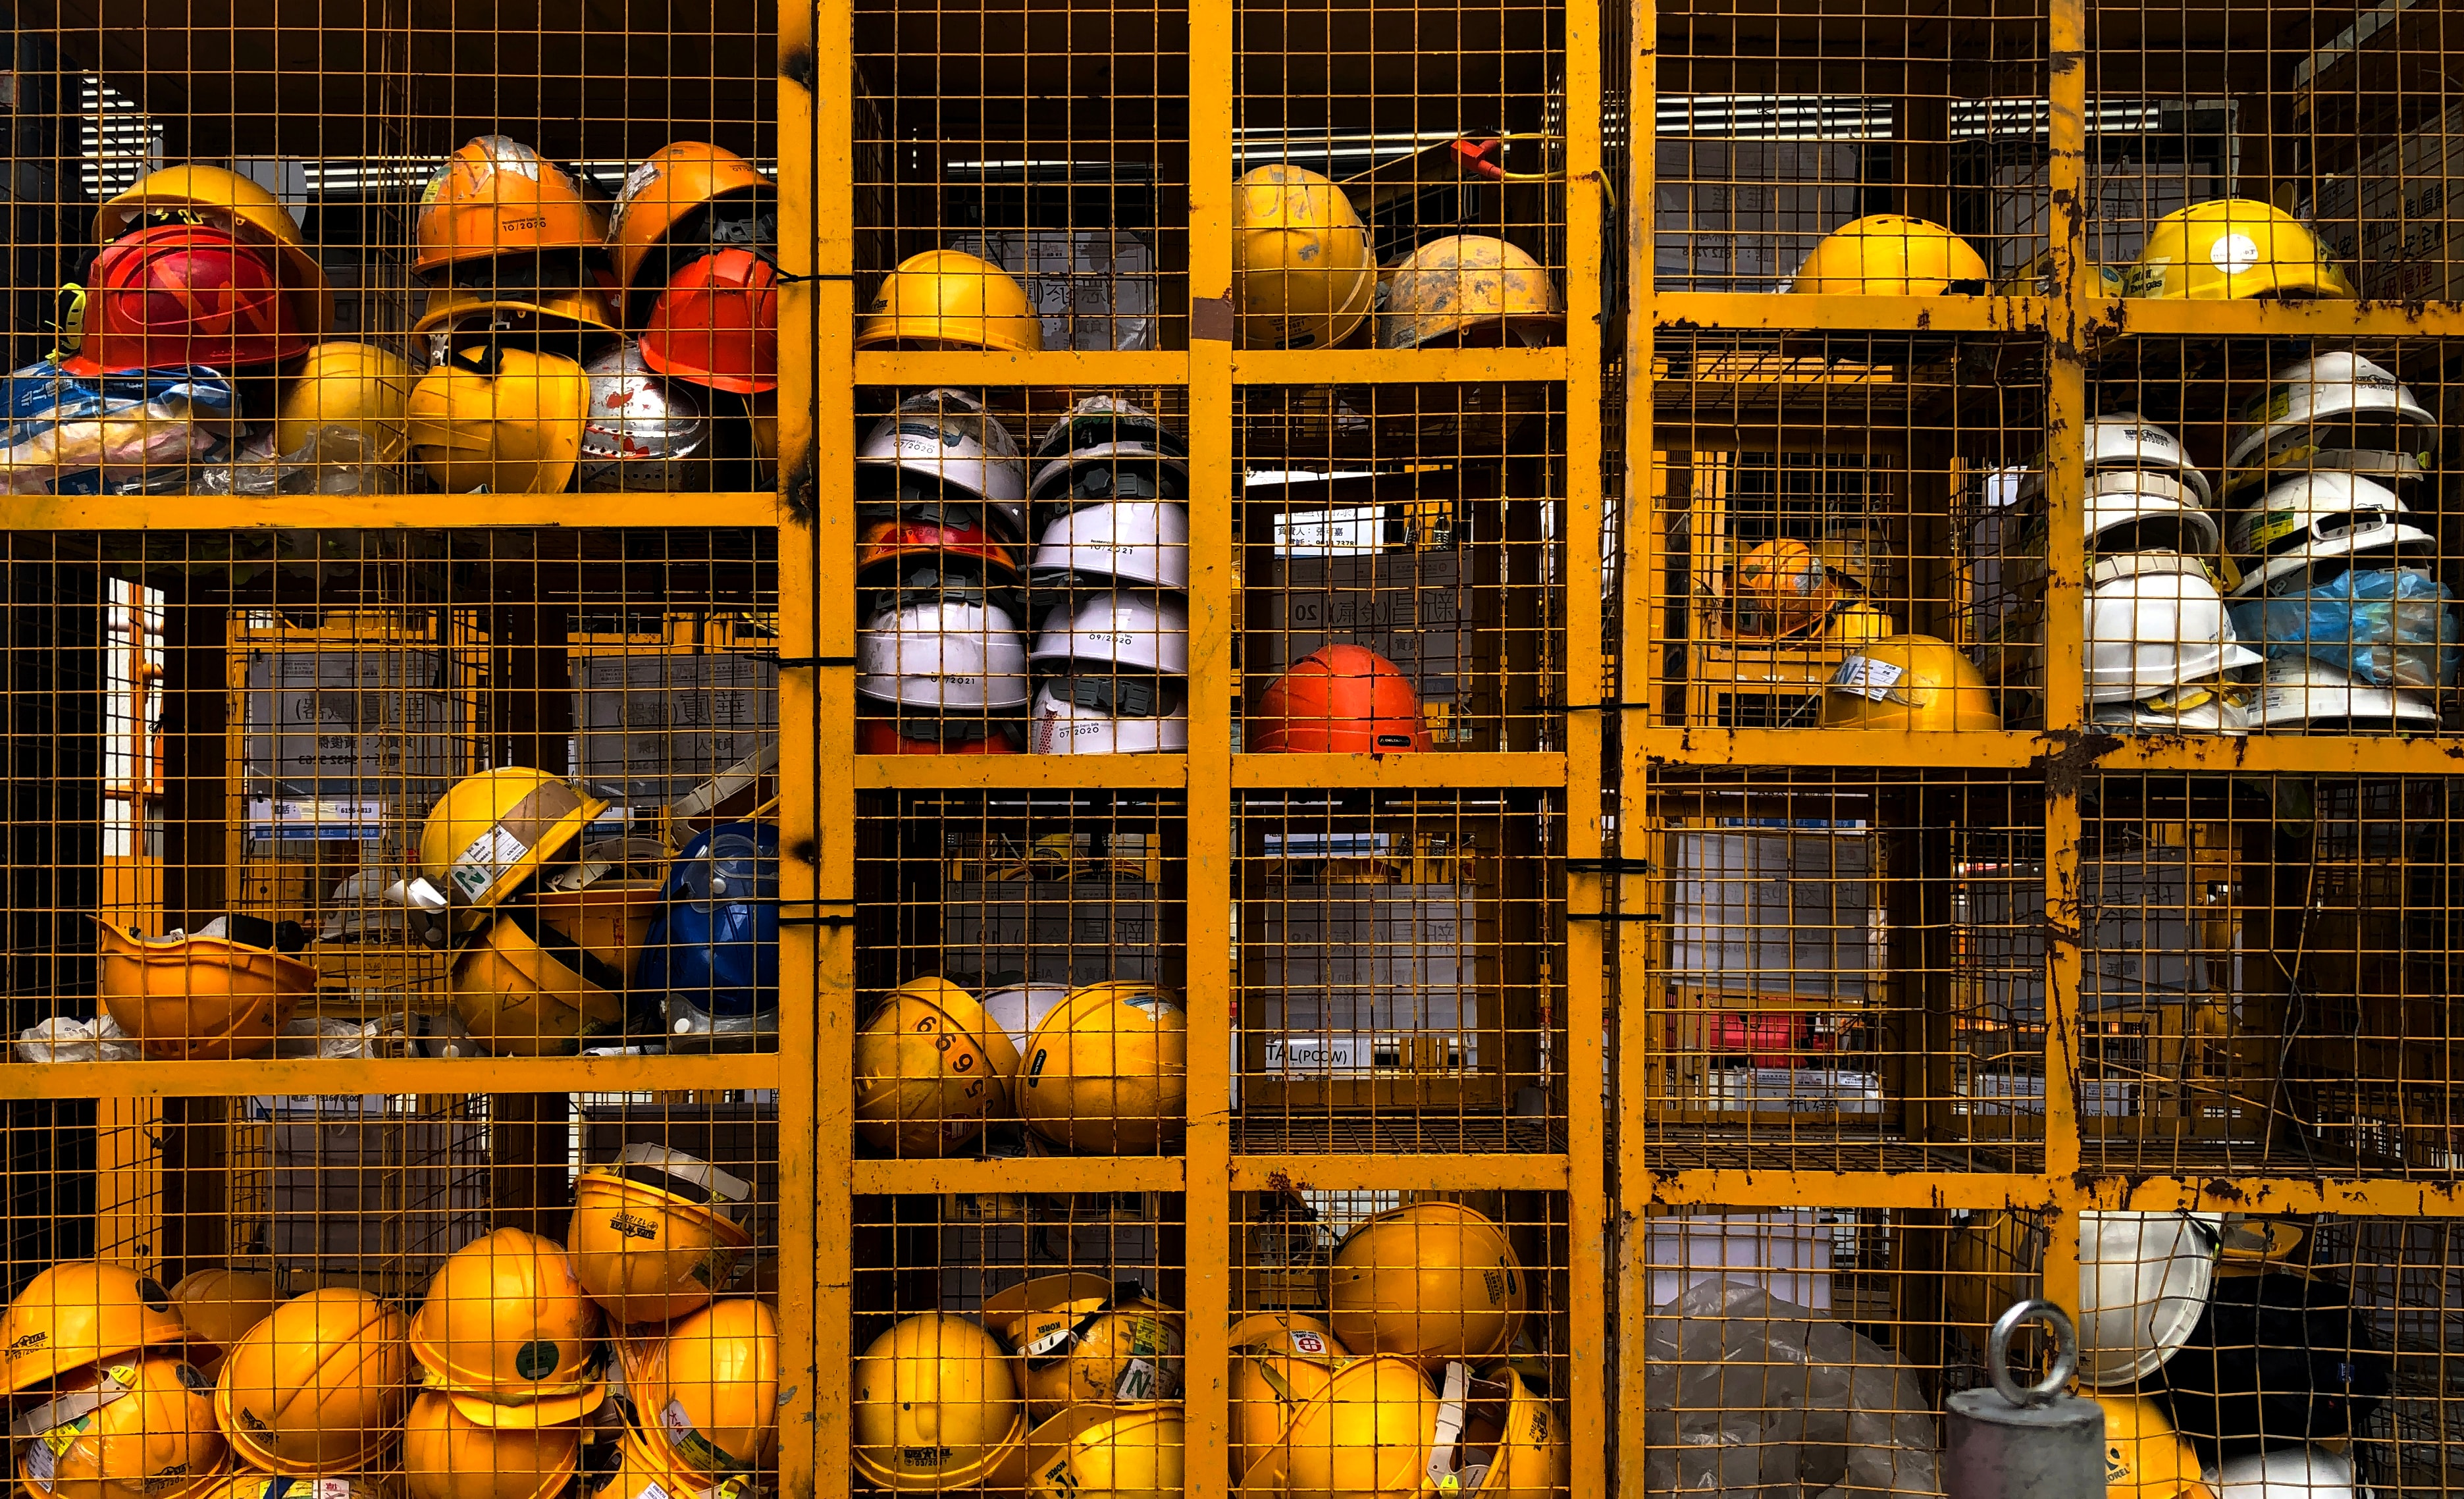 OSHA conducted Record number of inspections in 2019